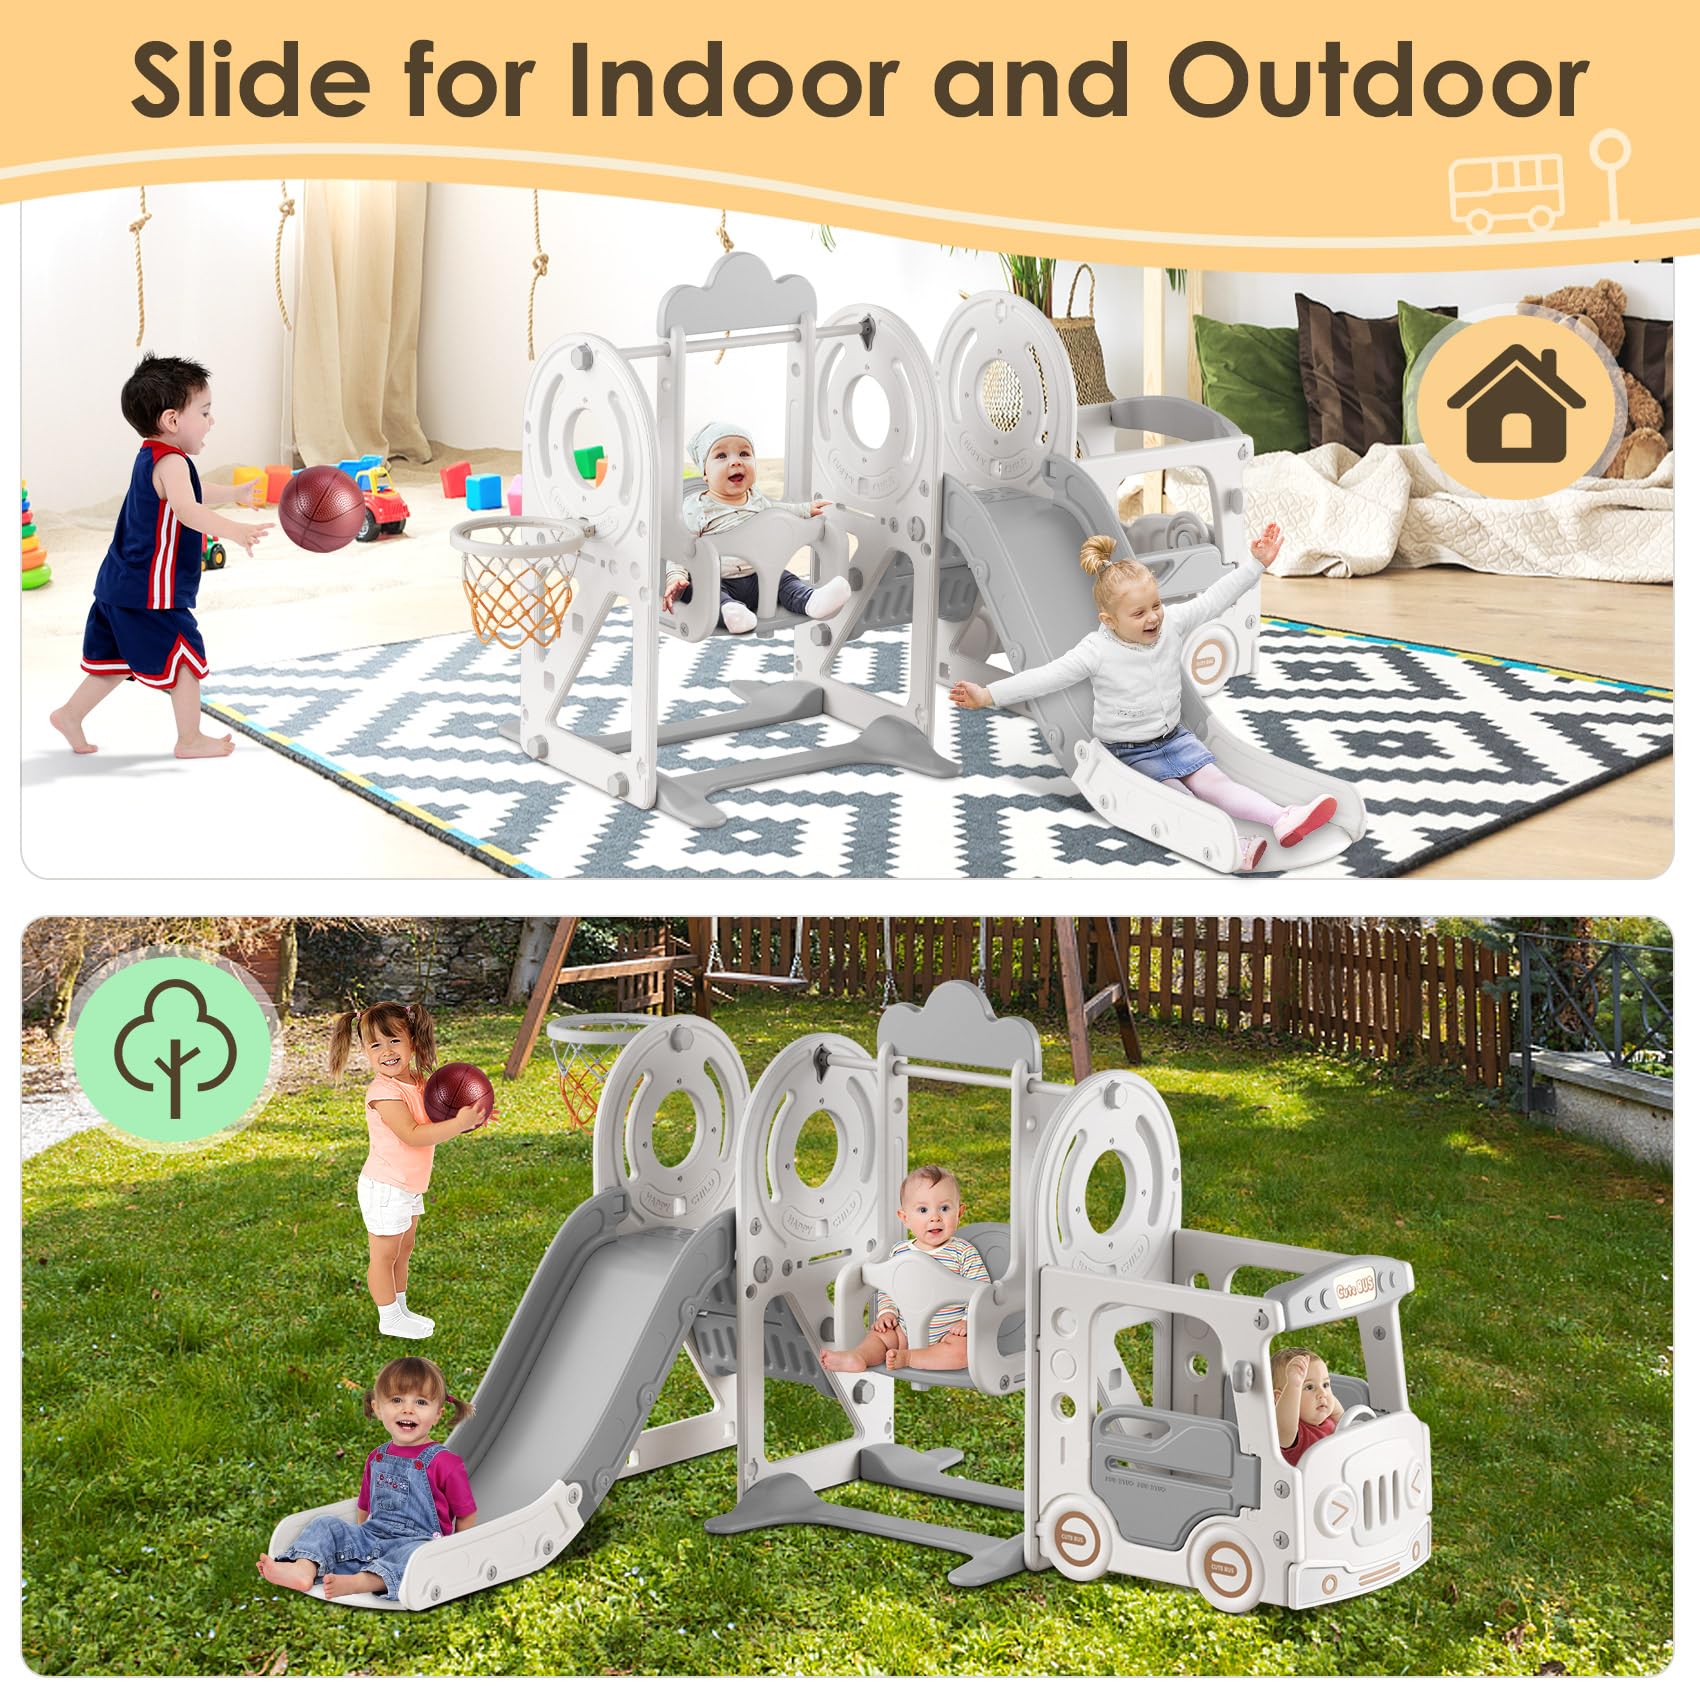 BIERUM 5 in 1 Toddler Slide and Swing Set, Kid Slide for Toddlers Age 1-3, Bus Themed Baby Slide with Basketball Hoop, Indoor Outdoor Slide Toddler Playset Toddler Playground